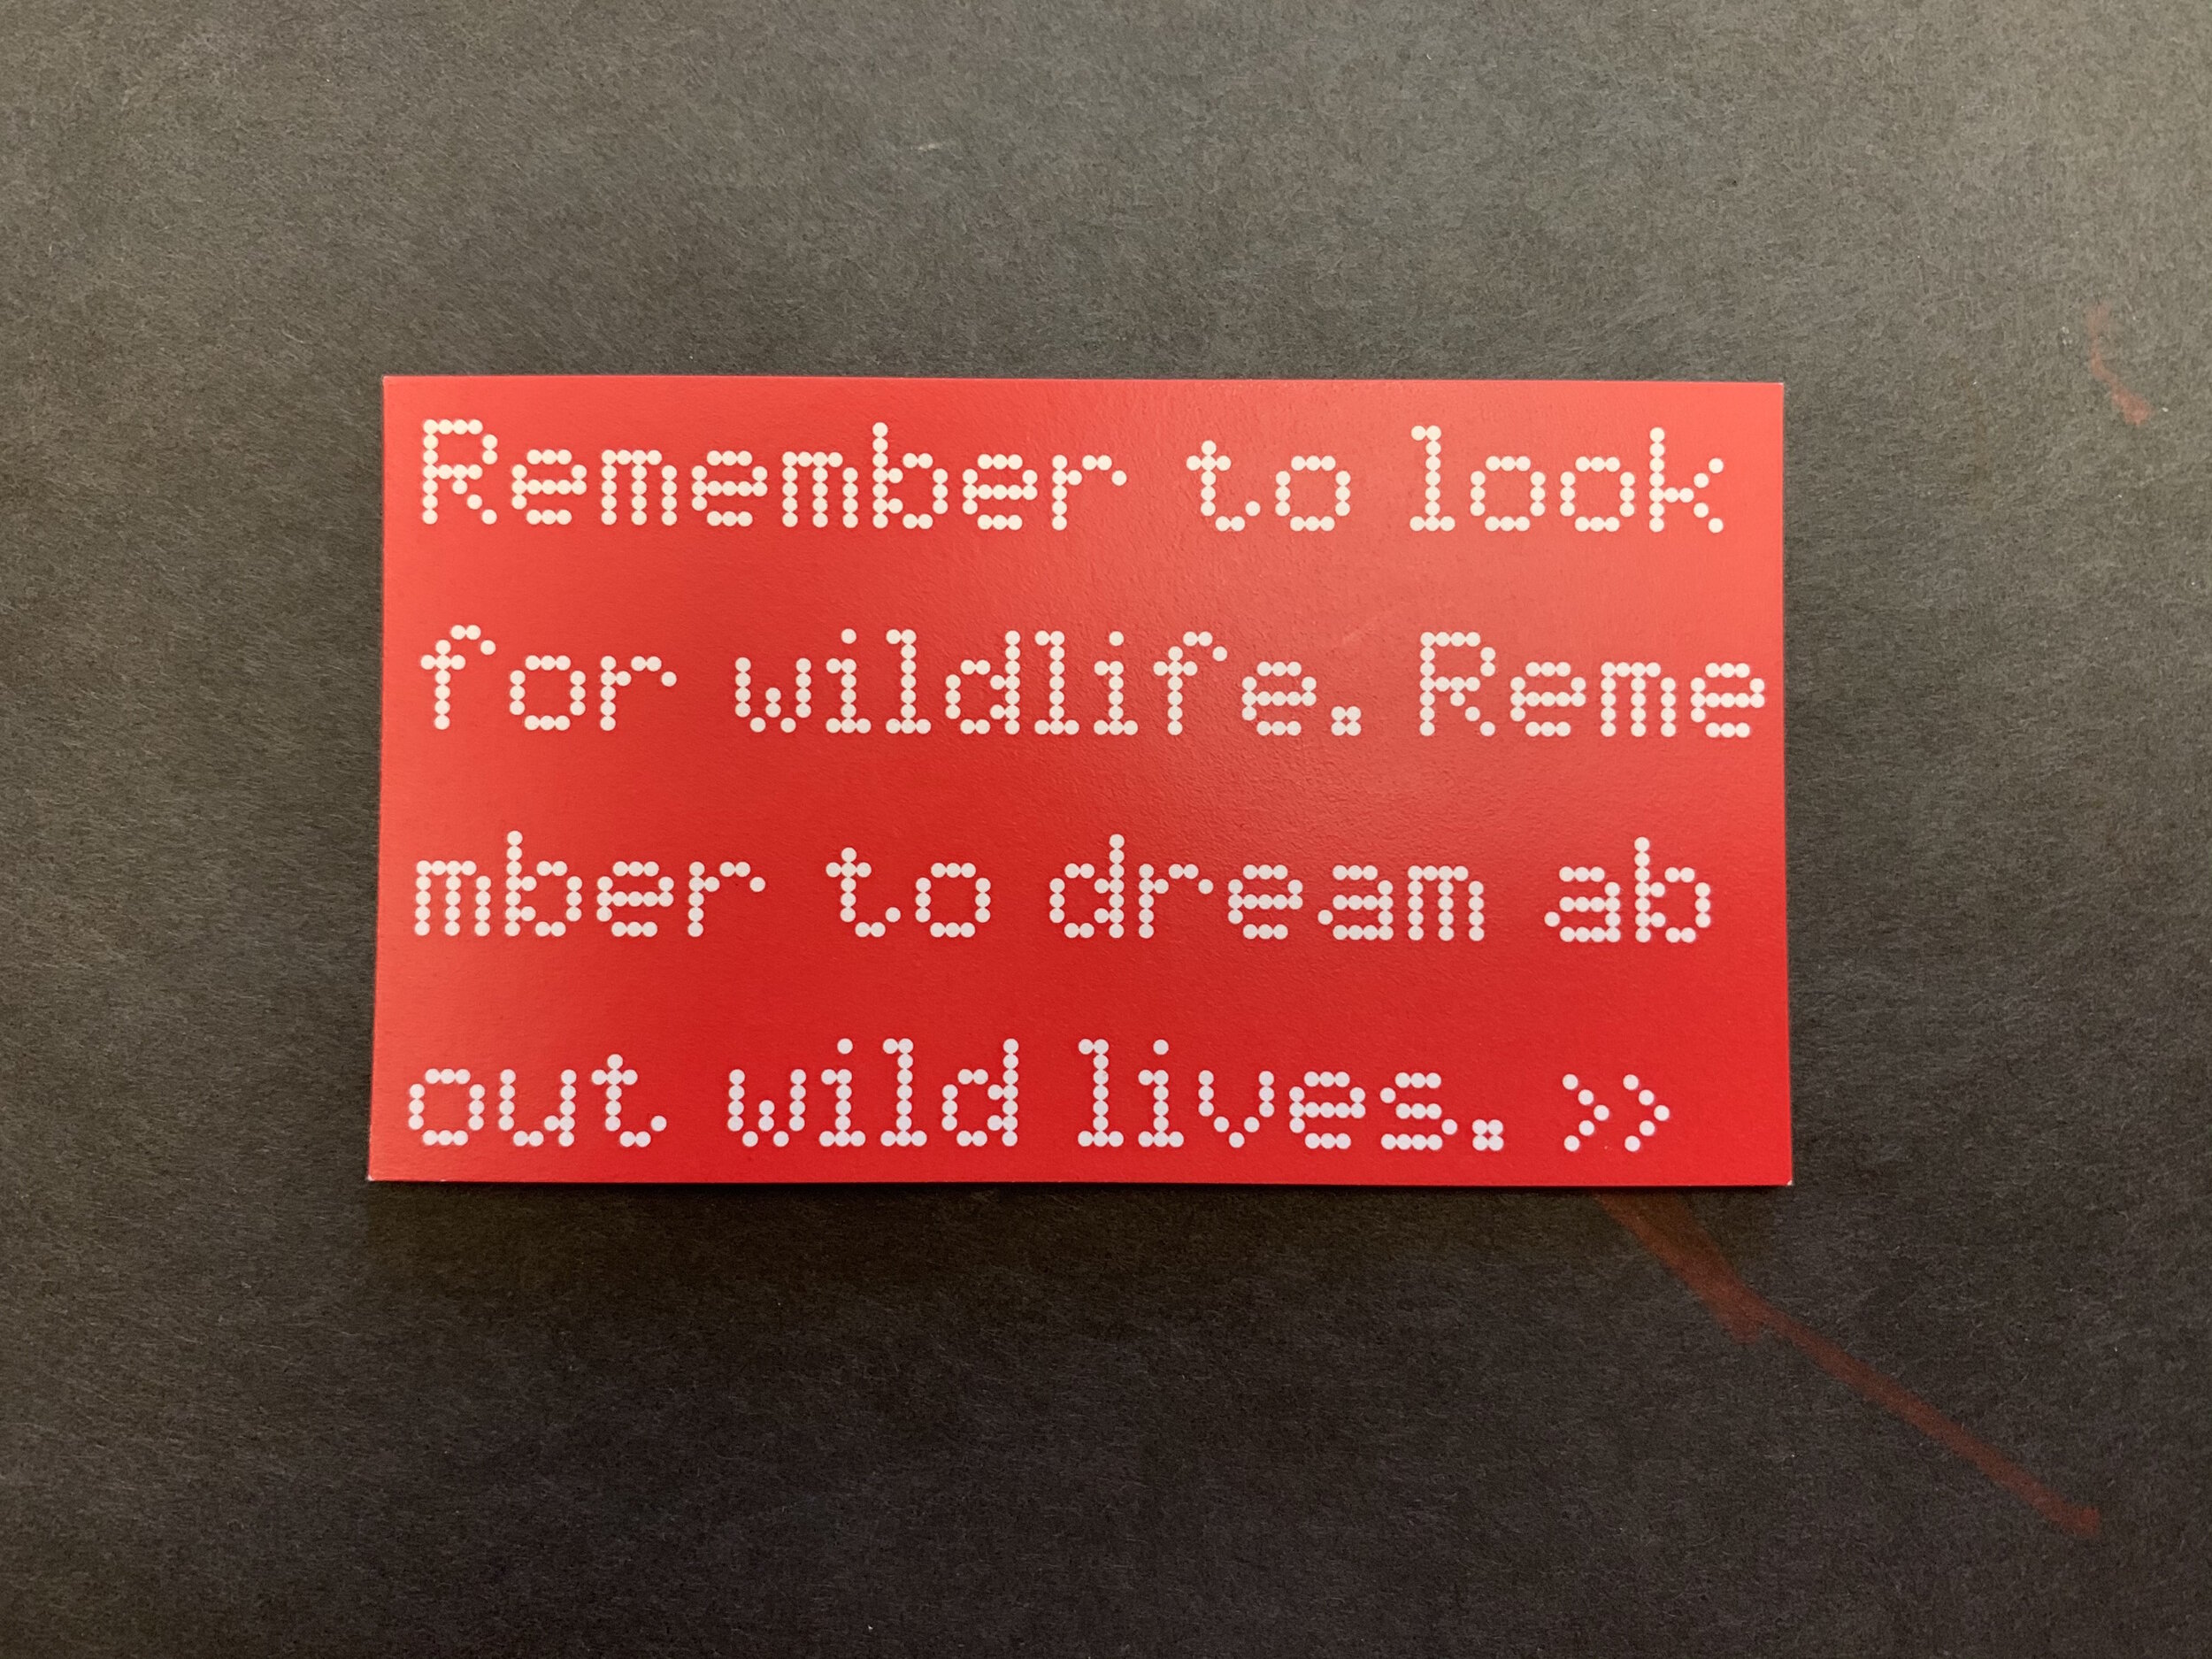   In the Fabric of the Woodland , reminder cards, Shoemaker Gallery, Juniata College Museum of Art, Huntingdon, Pennsylvania, 2019 